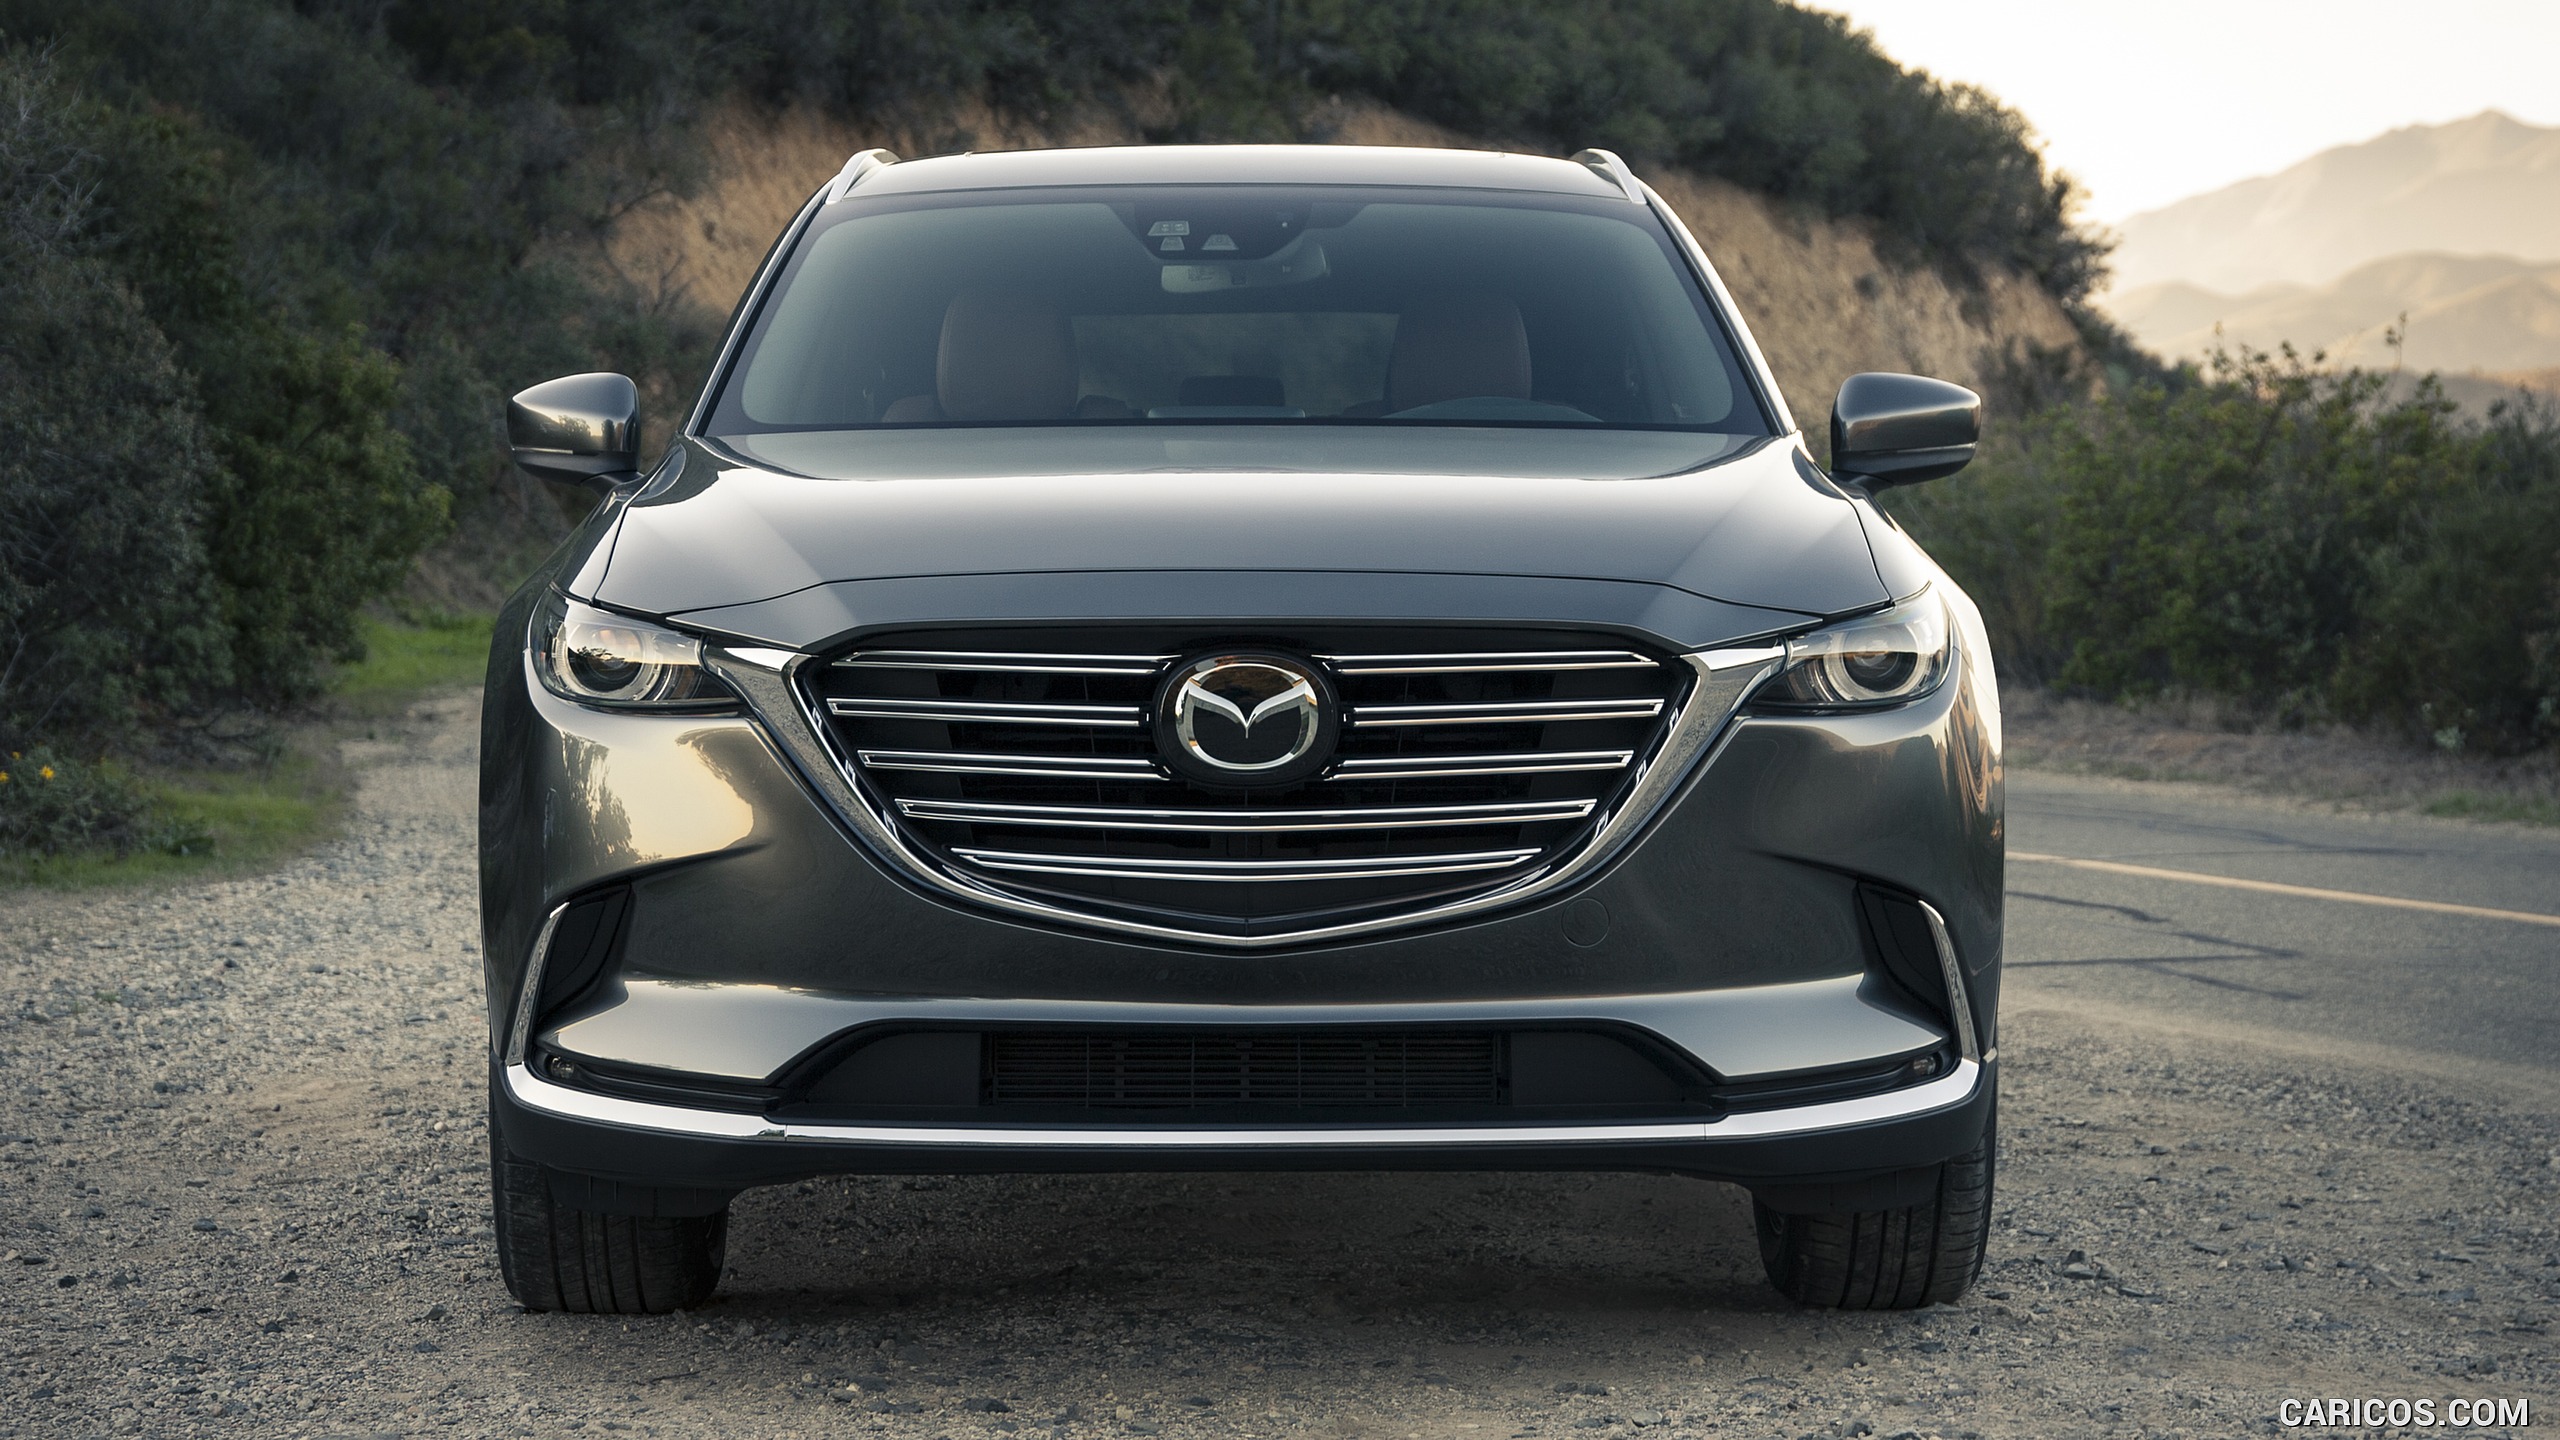 2016 Mazda CX-9 - Front, #3 of 69